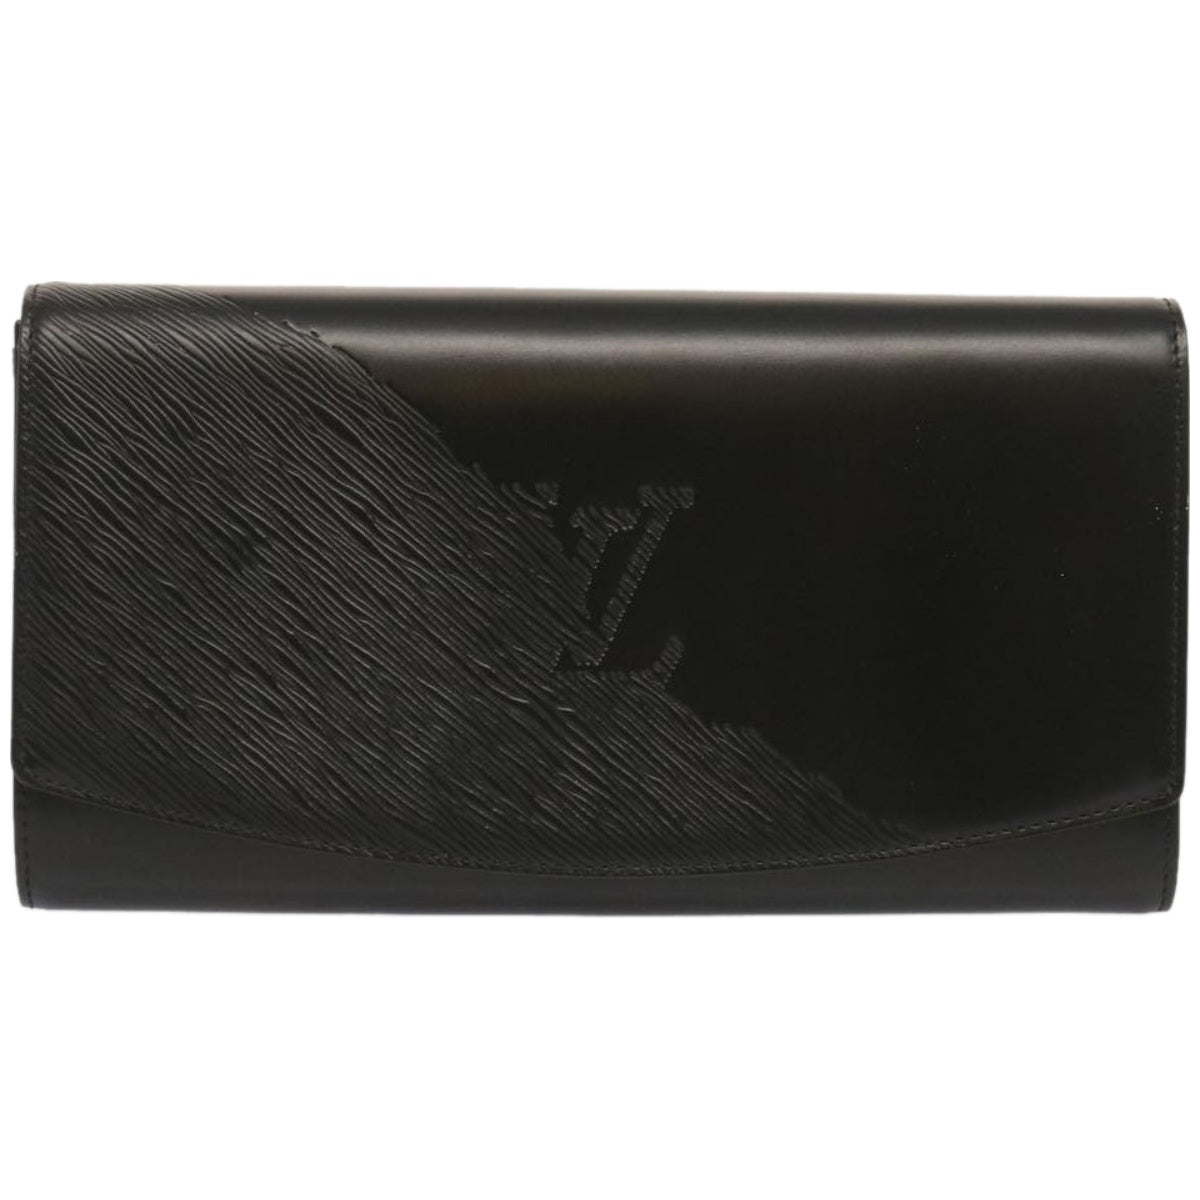 Pre-owned Louis Vuitton Opéra Black Leather Clutch Bag ()